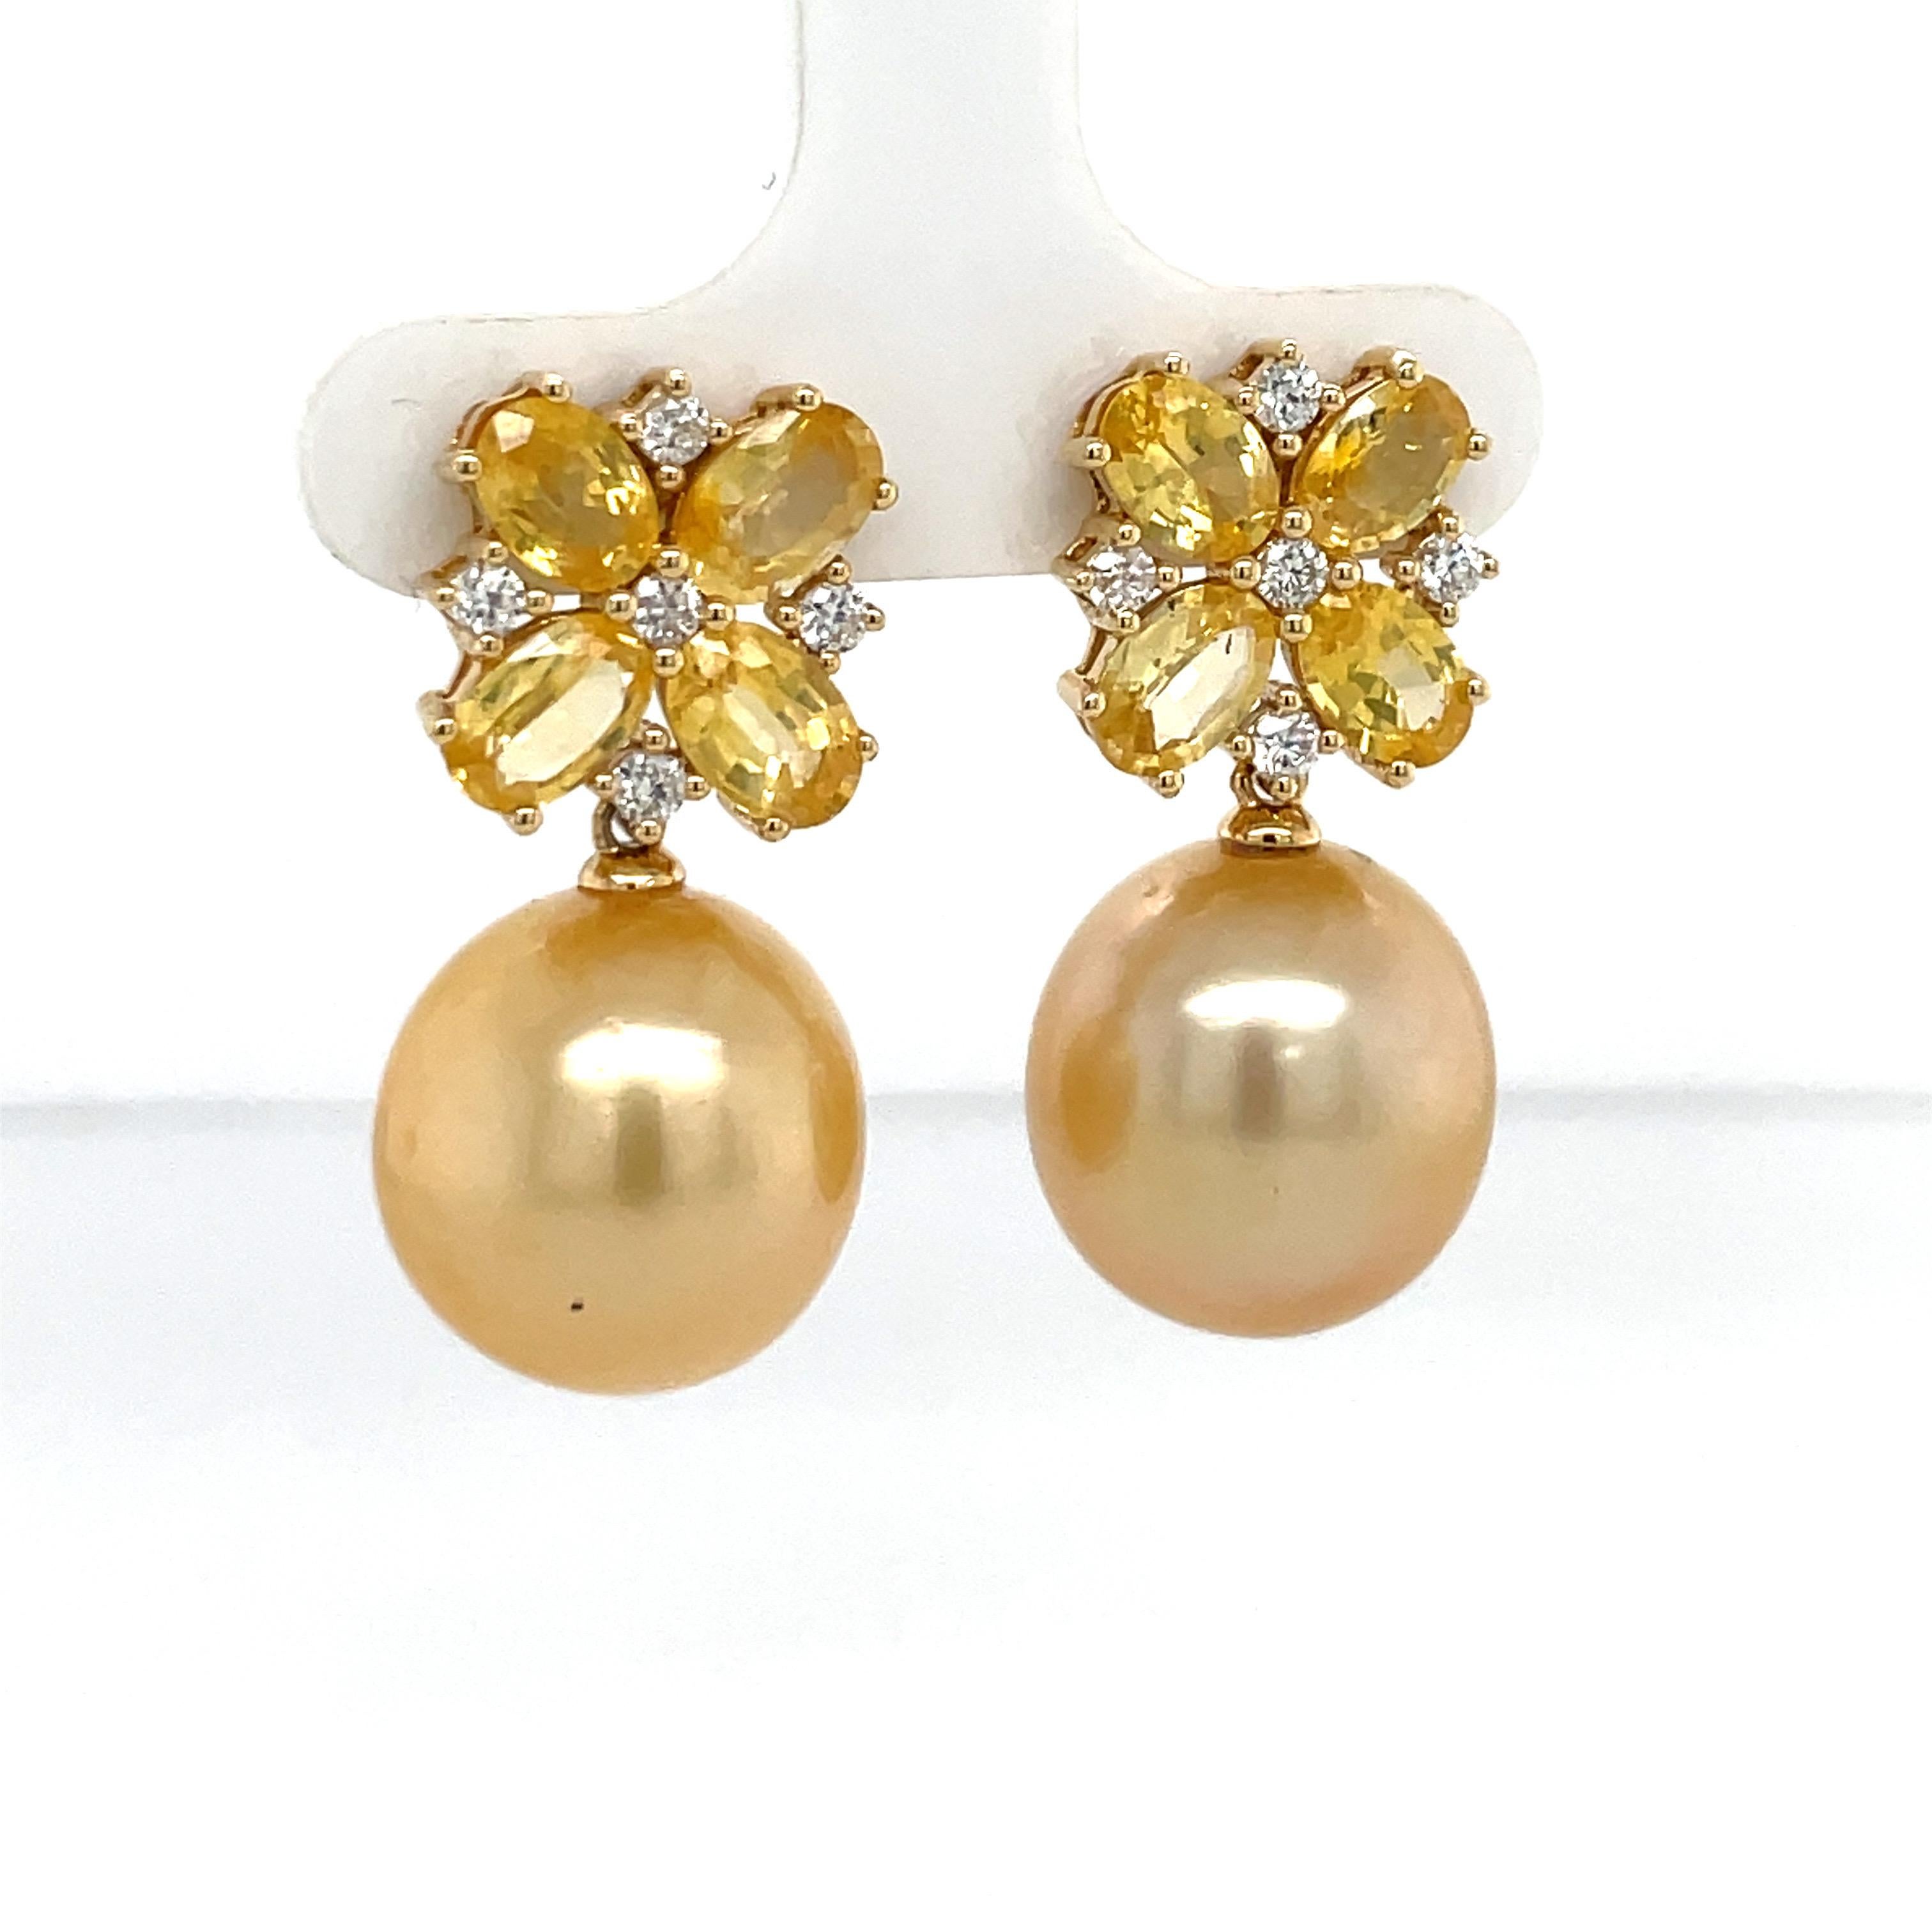 Contemporary 18 Karat Yellow Gold Sapphire Diamond Golden South Sea Pearl Earrings 5.02 Cttw For Sale